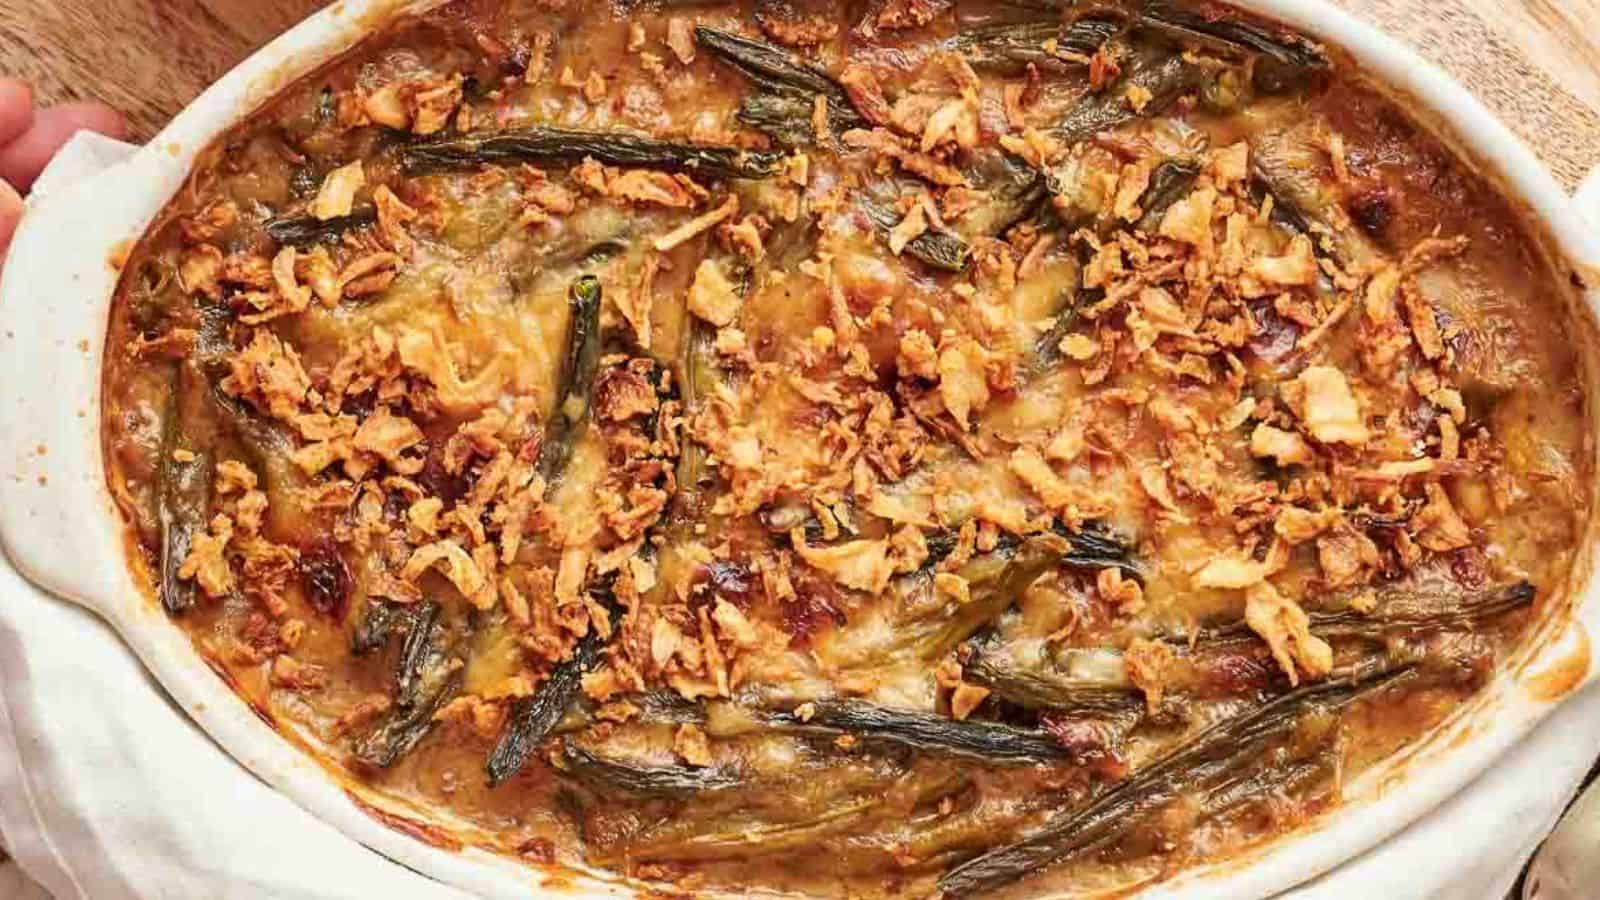 <p>Air Fryer Green Bean Casserole takes a holiday favorite and makes it foolproof. With crisp textures and robust flavors, this dish delivers without overwhelming your kitchen skills. It’s a testament to how easy cooking can be.<br><strong>Get the Recipe: </strong><a href="https://www.splashoftaste.com/air-fryer-green-bean-casserole/?utm_source=msn&utm_medium=page&utm_campaign=msn">Air fryer Green Bean Casserole</a></p>